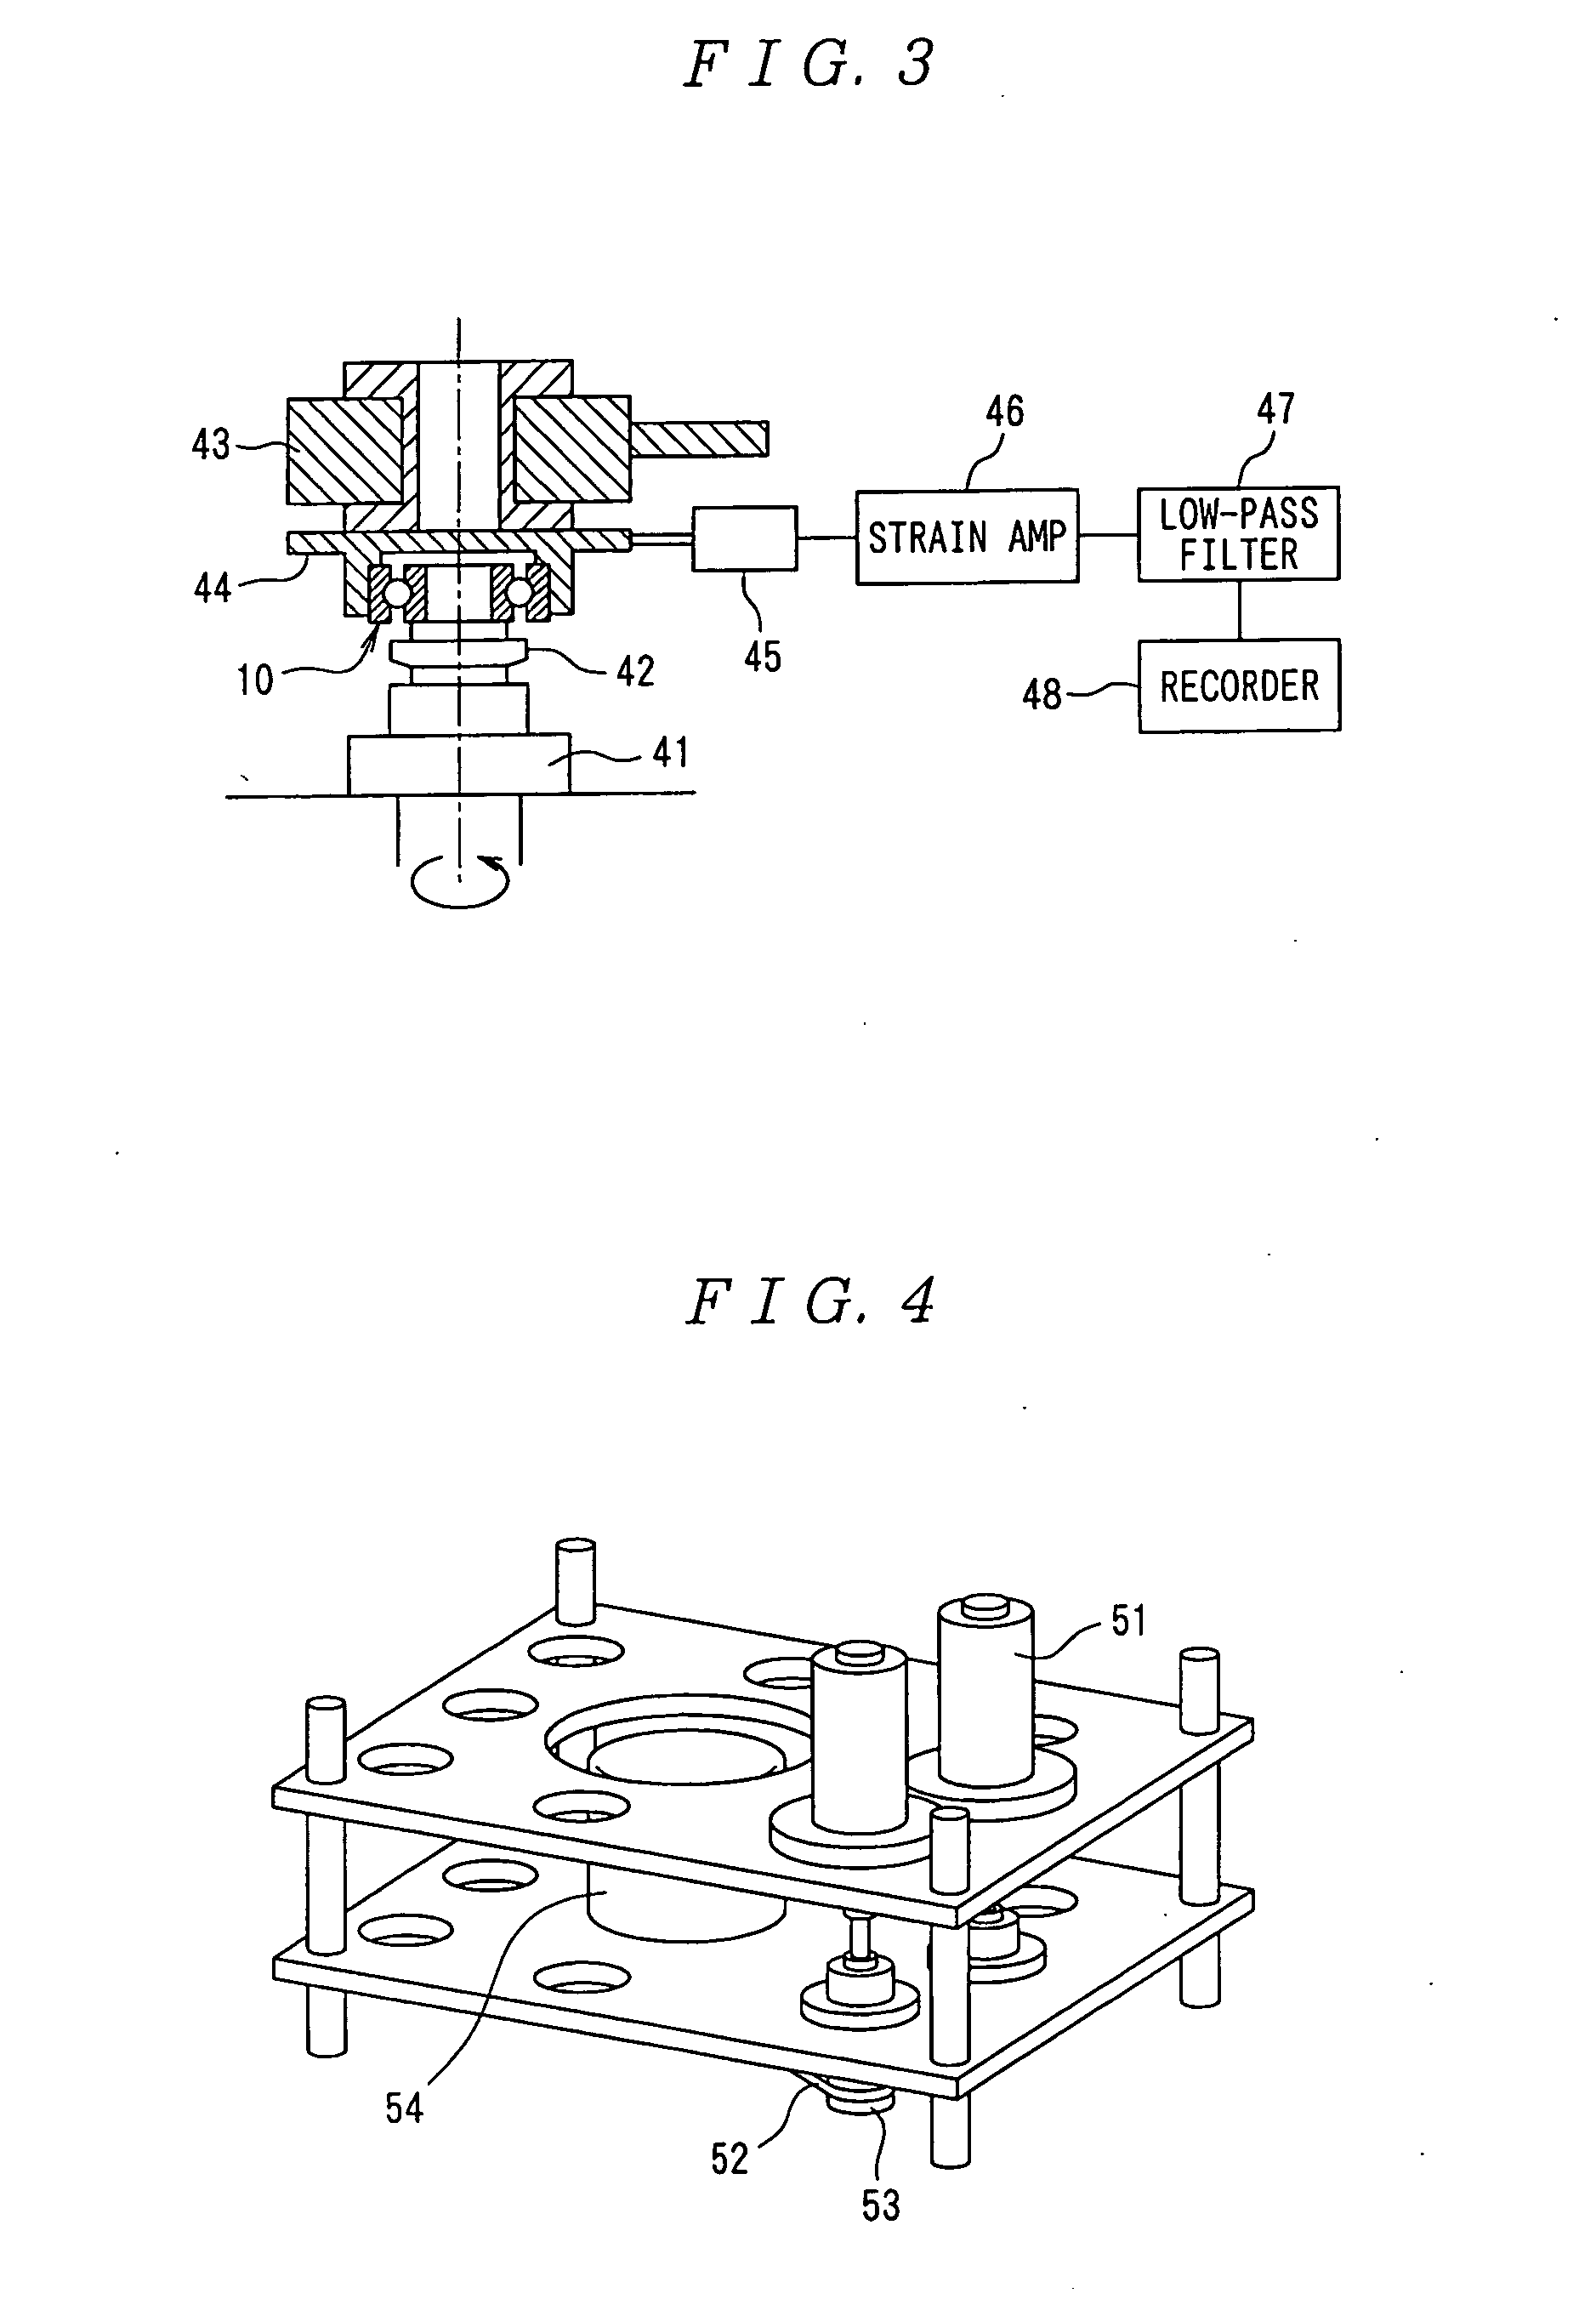 Grease composition and rolling apparatus